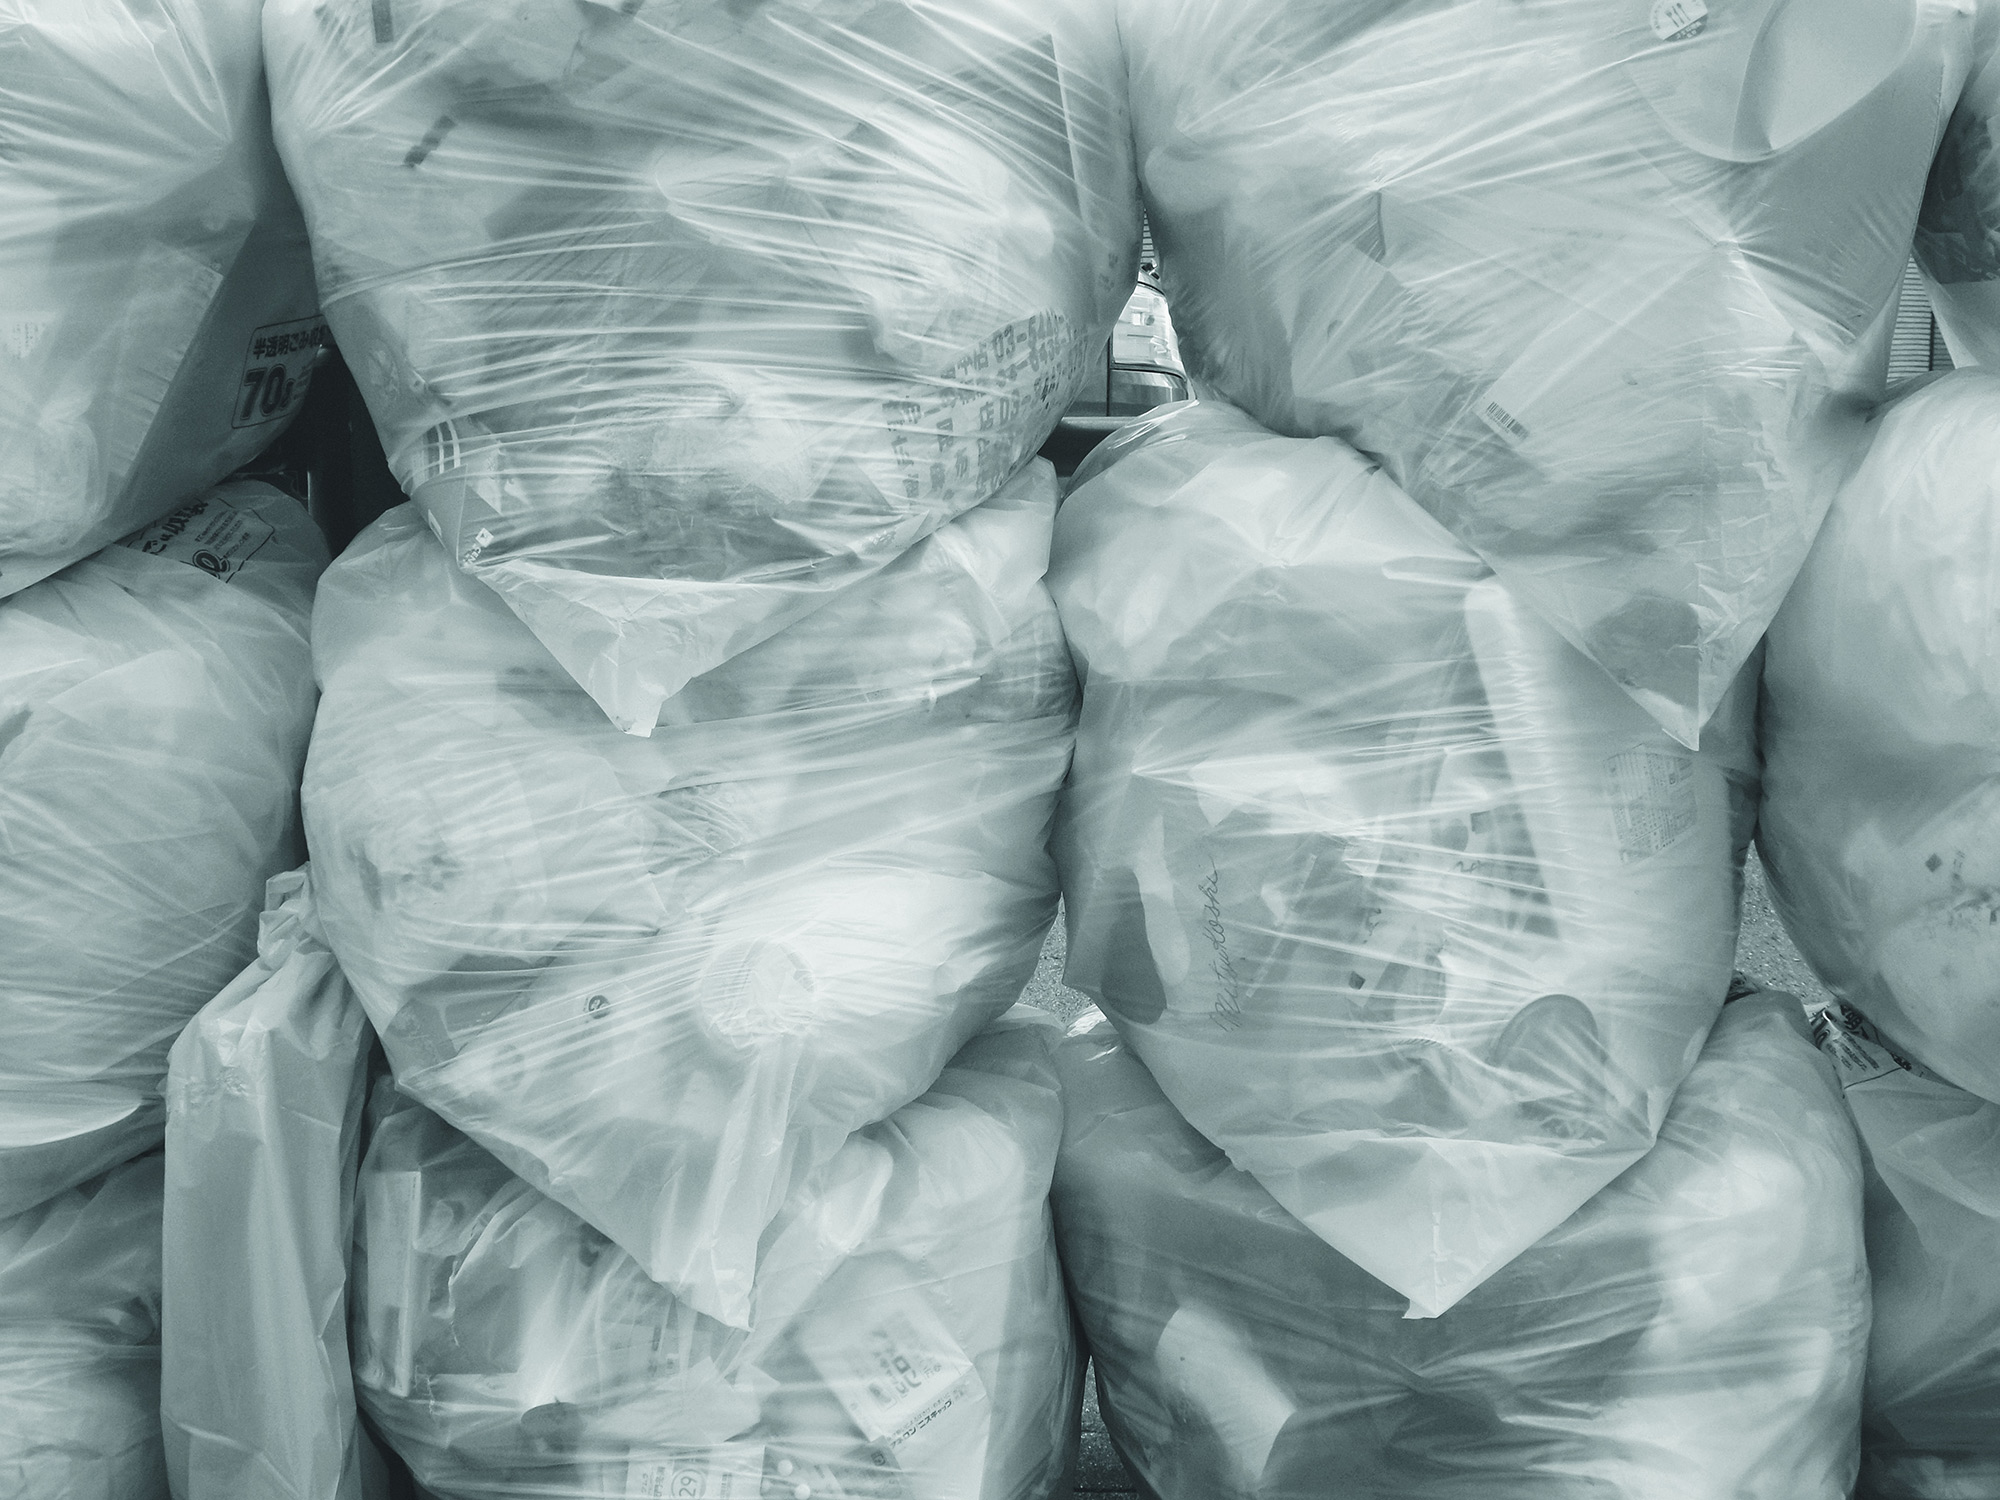 The Future of Waste Management in Canada How Plastic Garbage Bags are Being Phased Out